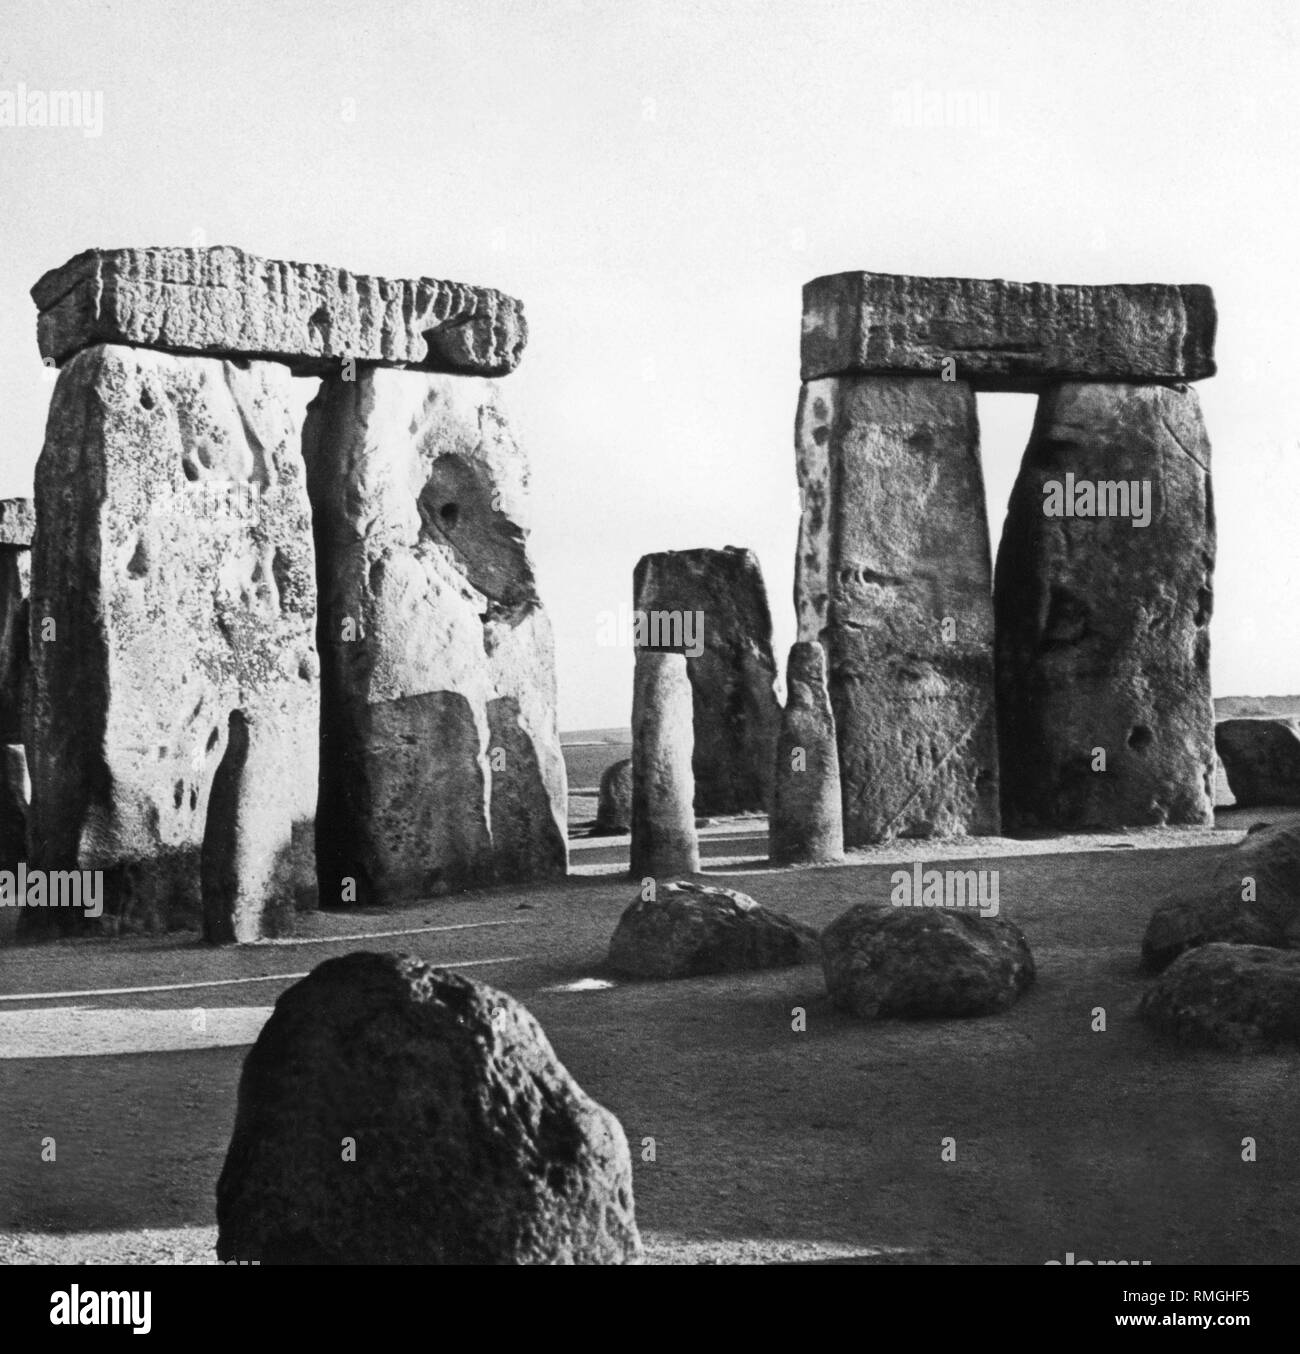 The picture shows a view of the megalithic site Stonehenge near Salisbury in the south of England. The picture is probably from the 1980s. Stock Photo